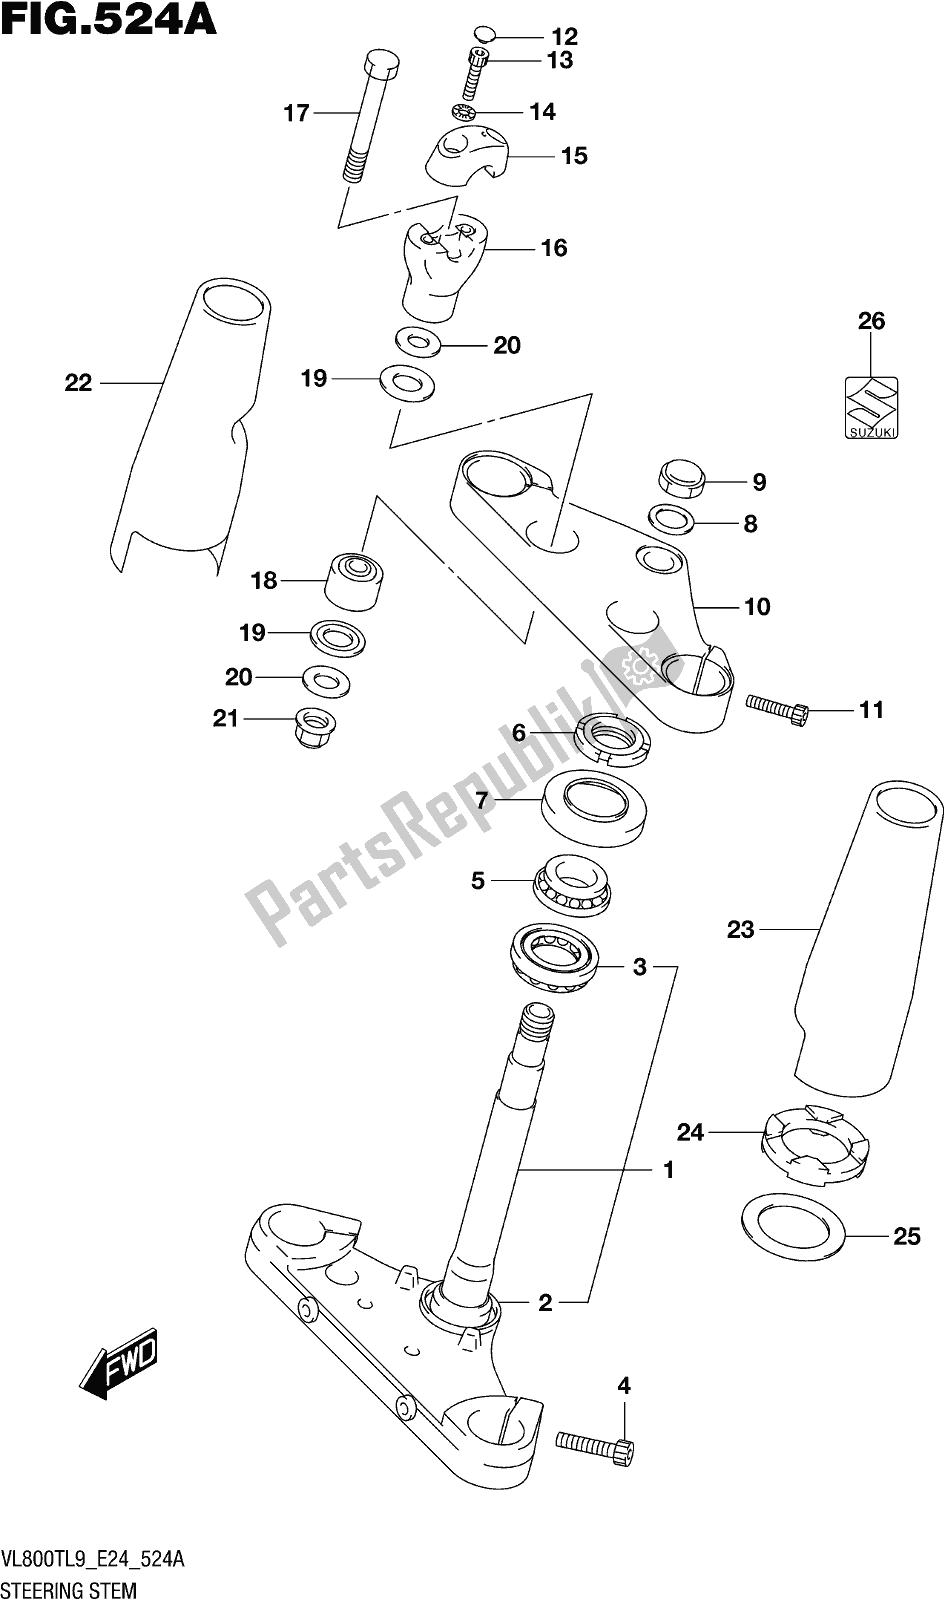 All parts for the Fig. 524a Steering Stem of the Suzuki VL 800T 2019